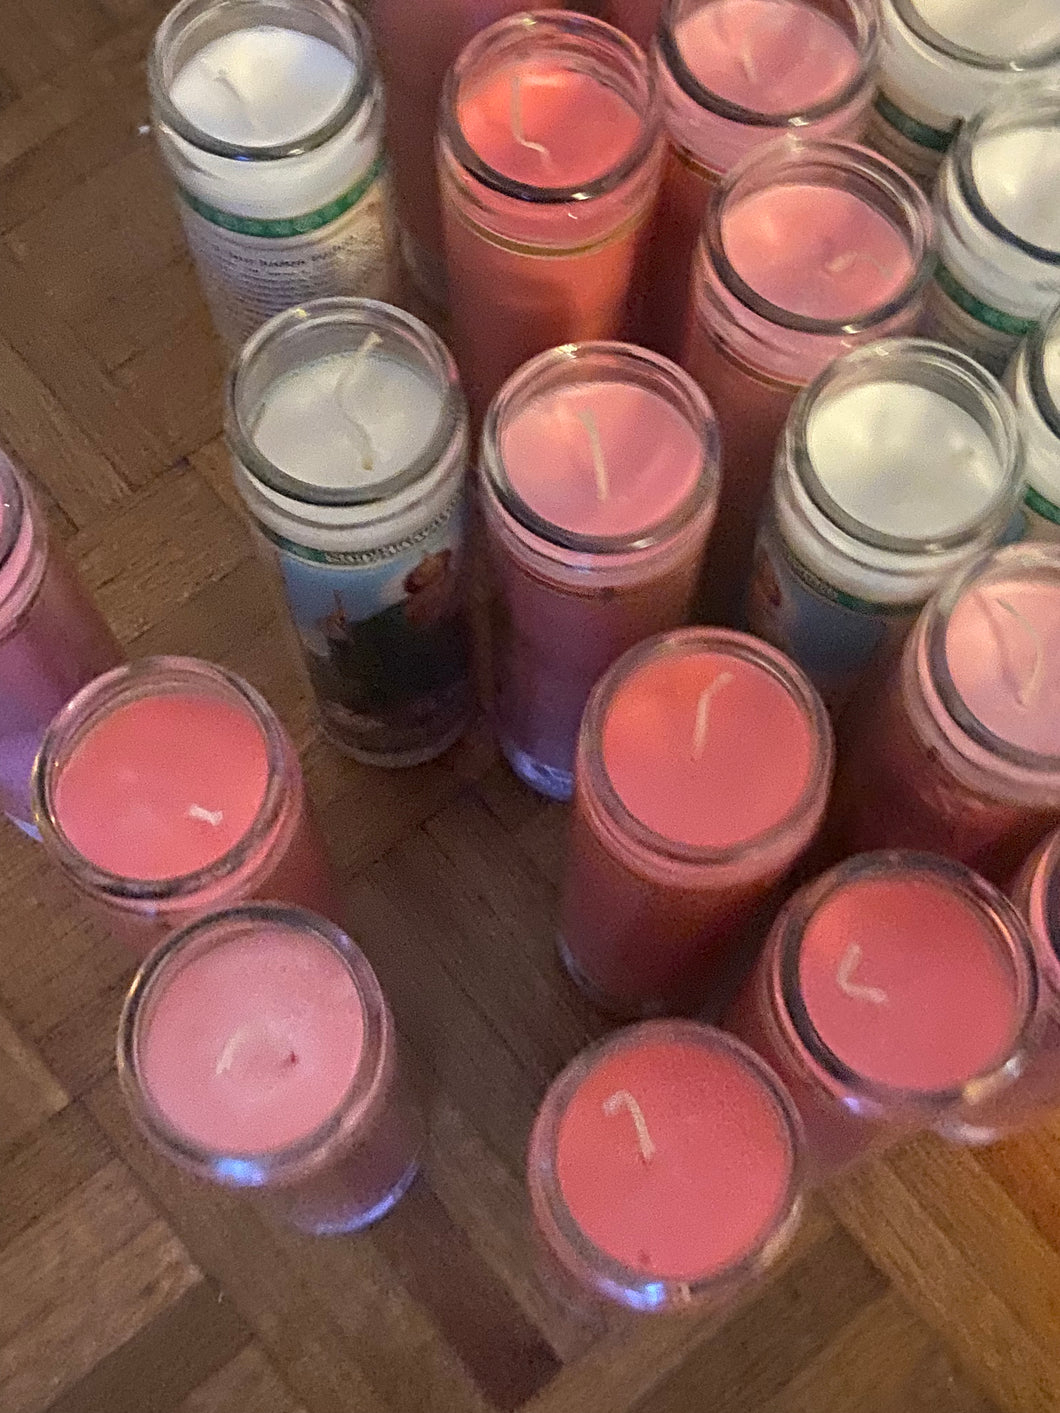 Fixed candles